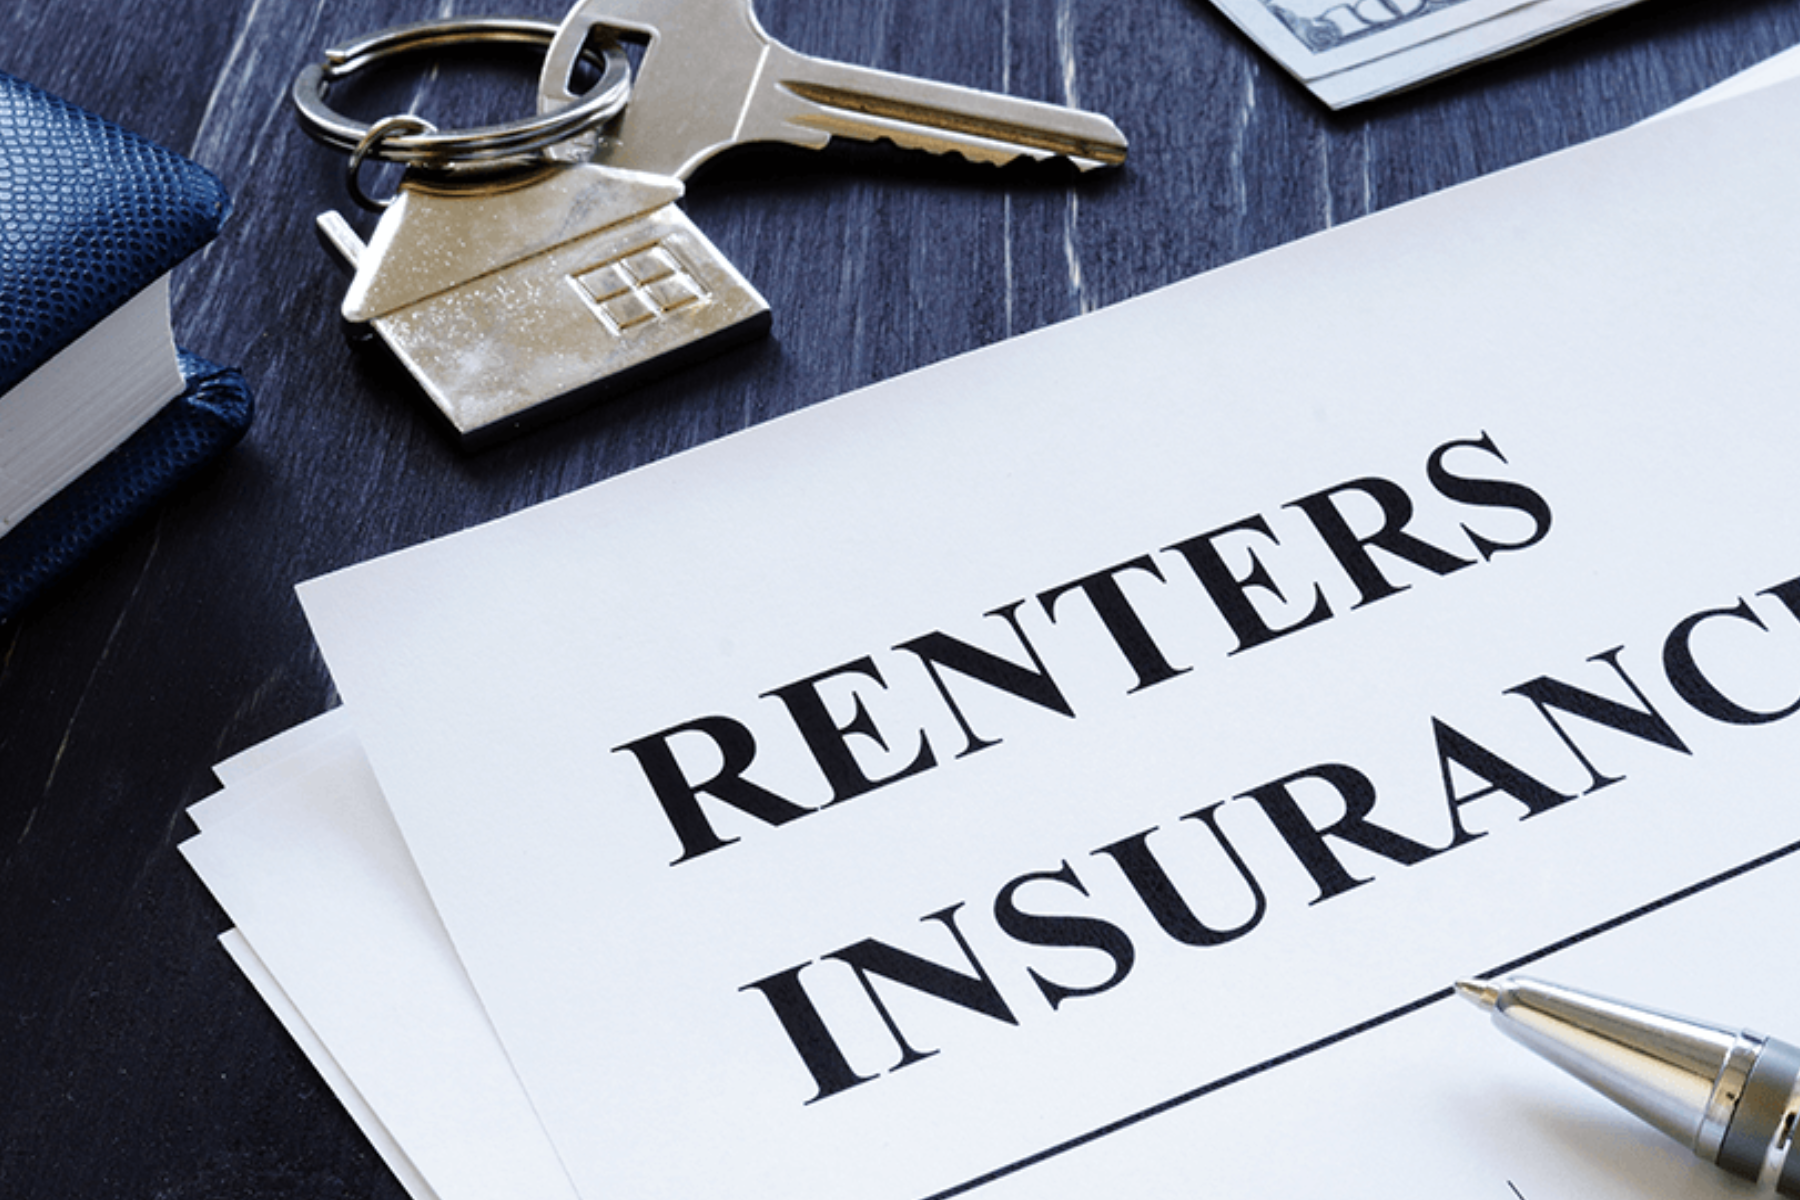 A paper on renters insurance